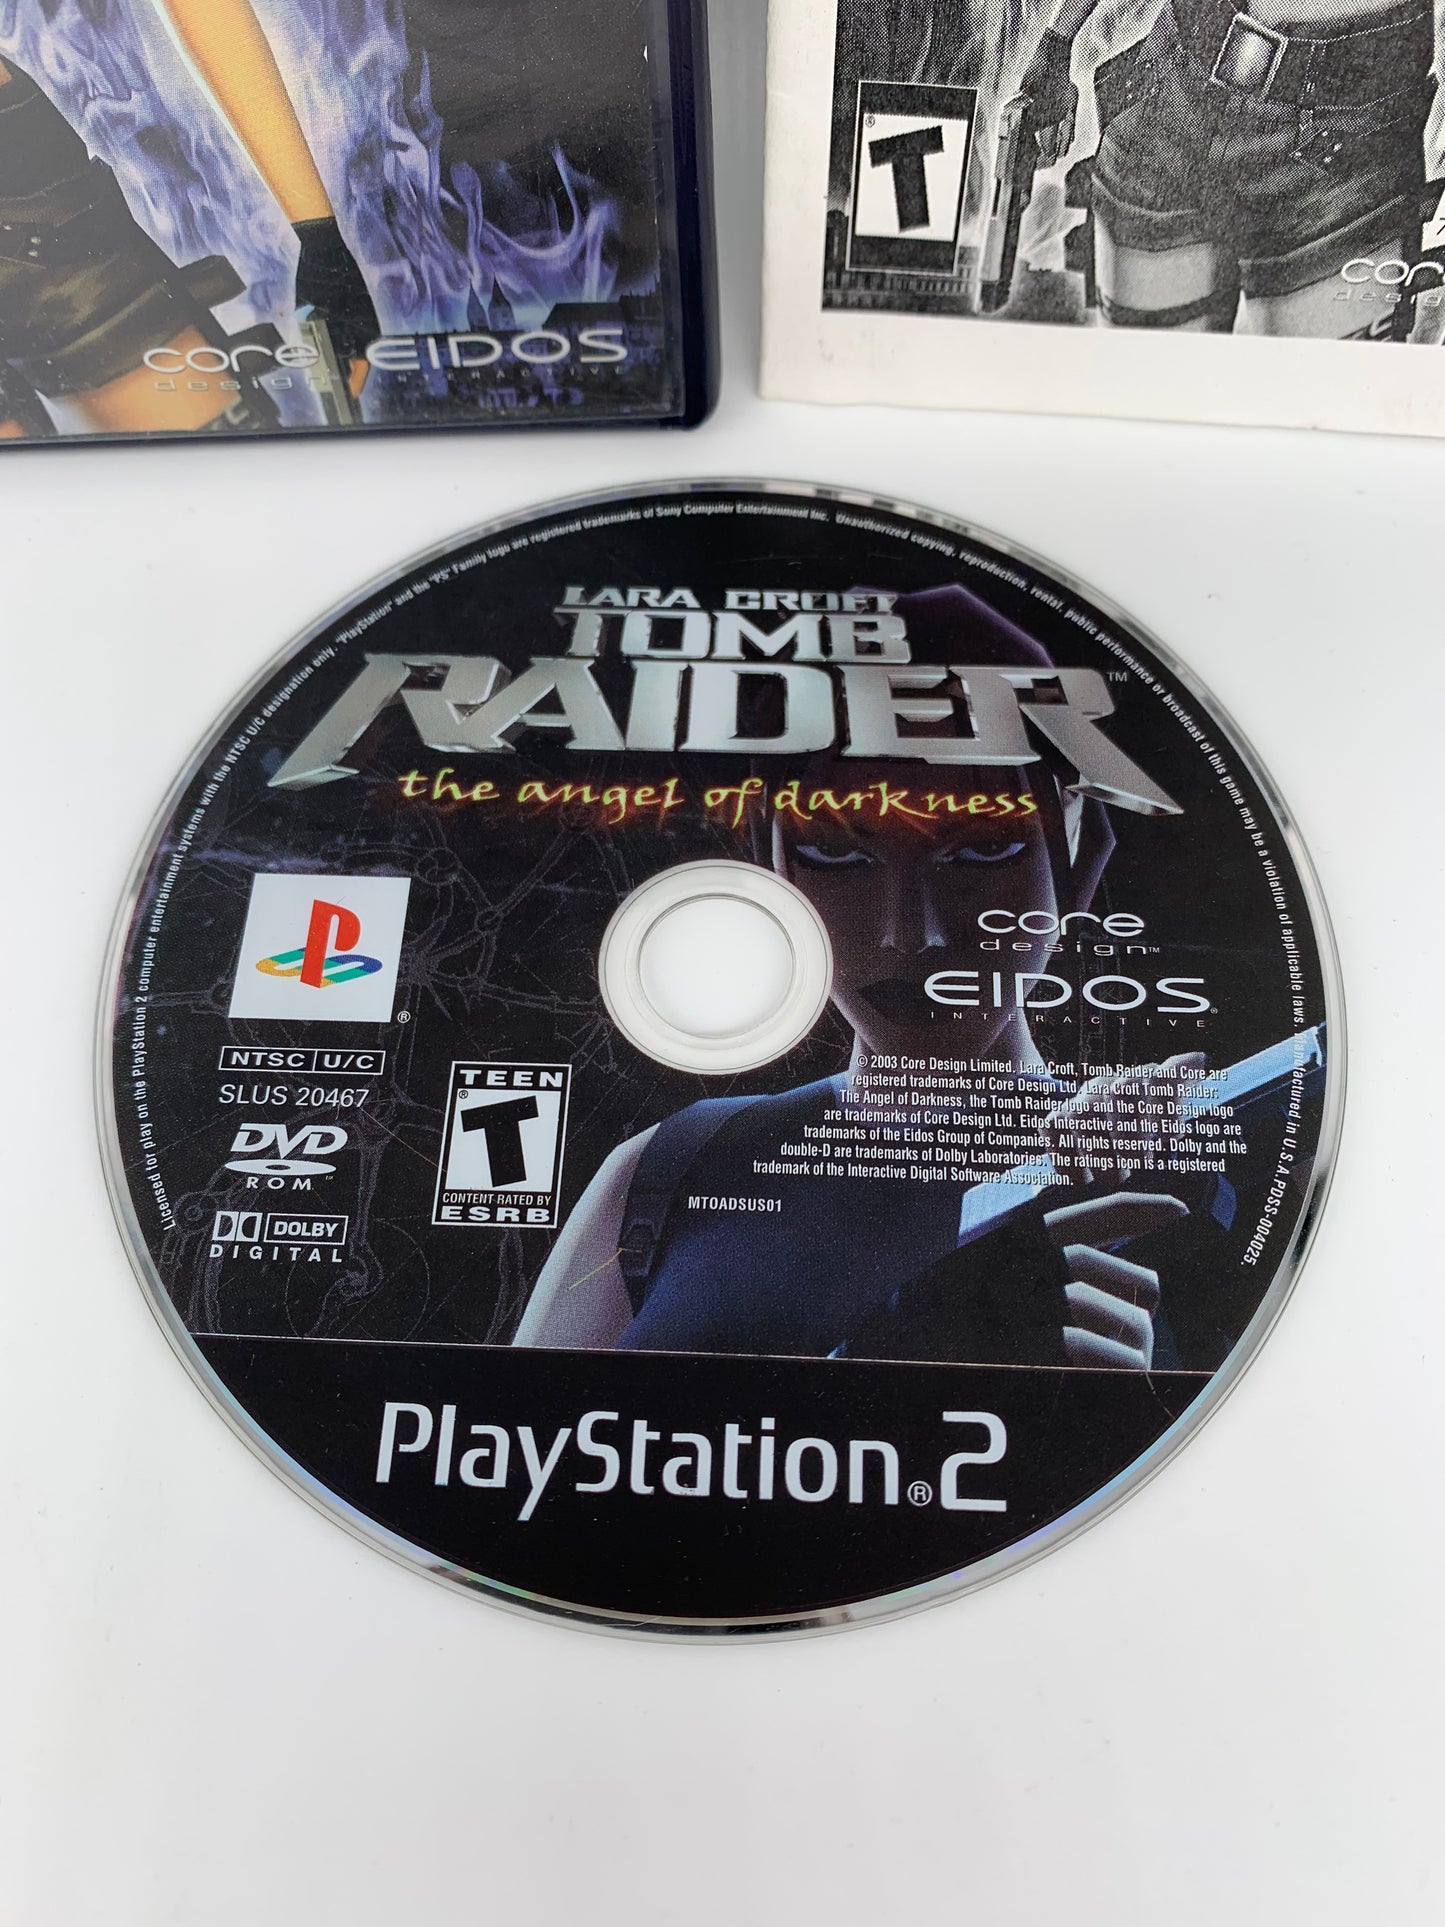 SONY PLAYSTATiON 2 [PS2] | TOMB RAiDER THE ANGEL OF DARKNESS